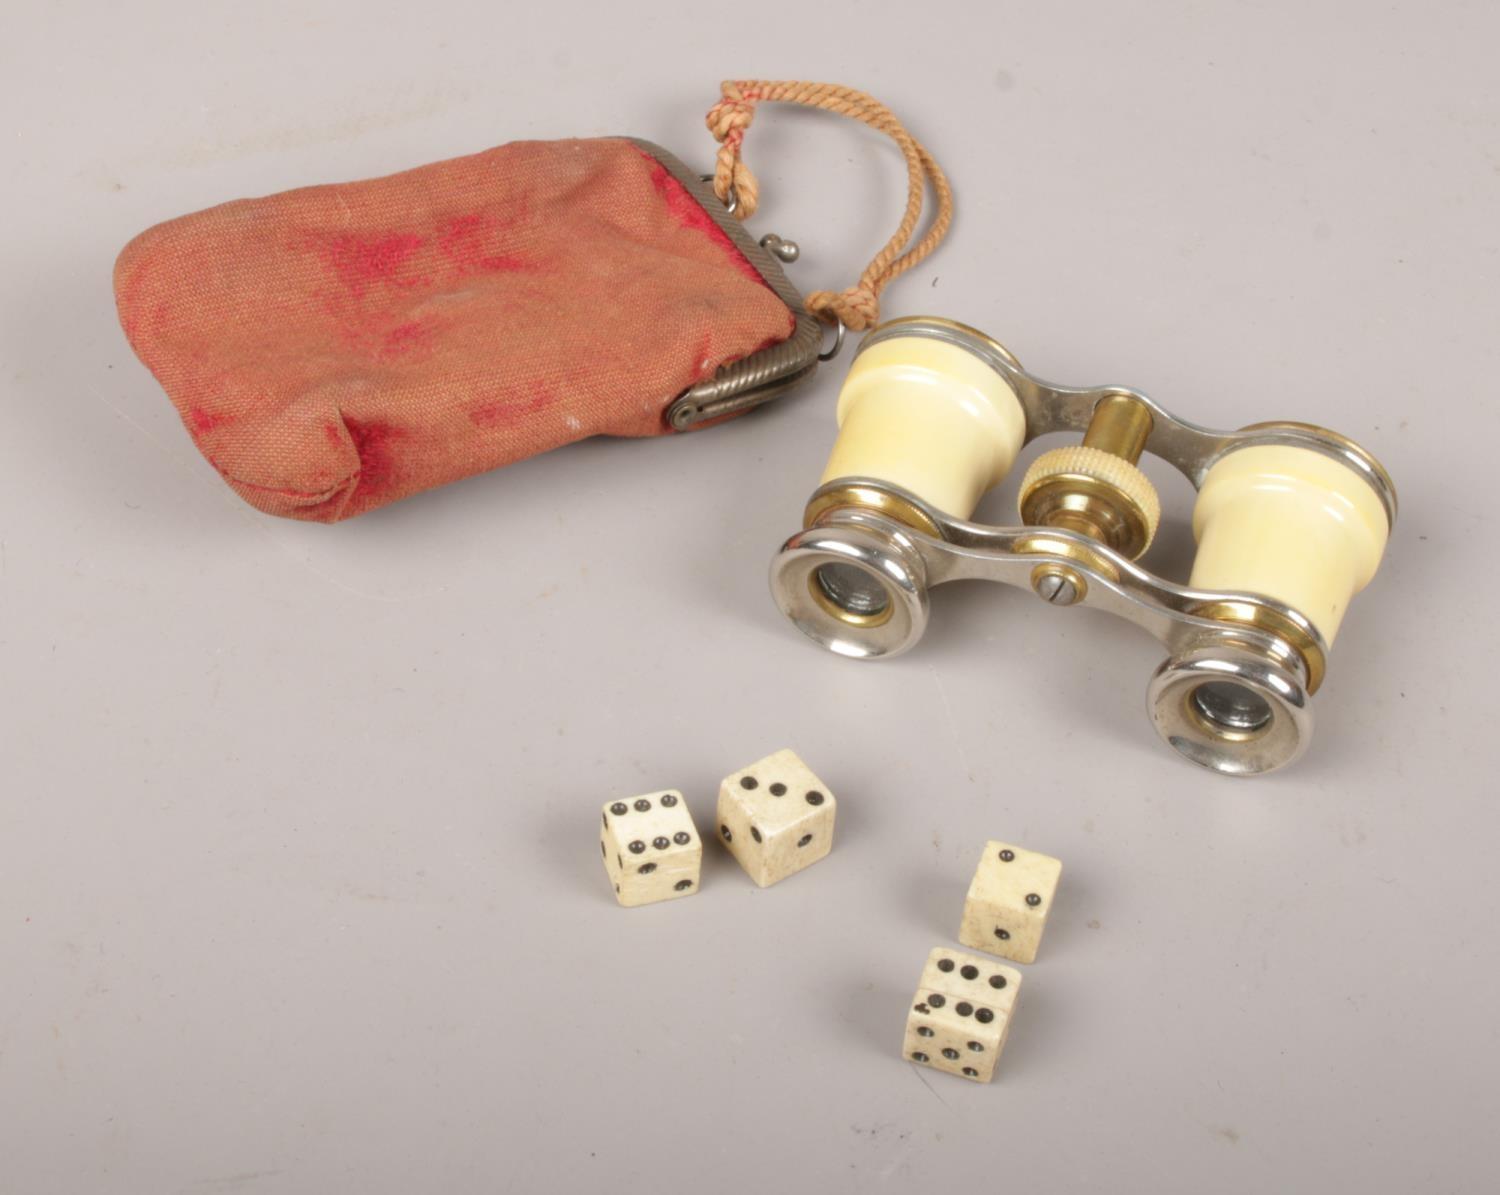 Vintage opera glasses with fabric purse to include four bone dice. - Image 2 of 2